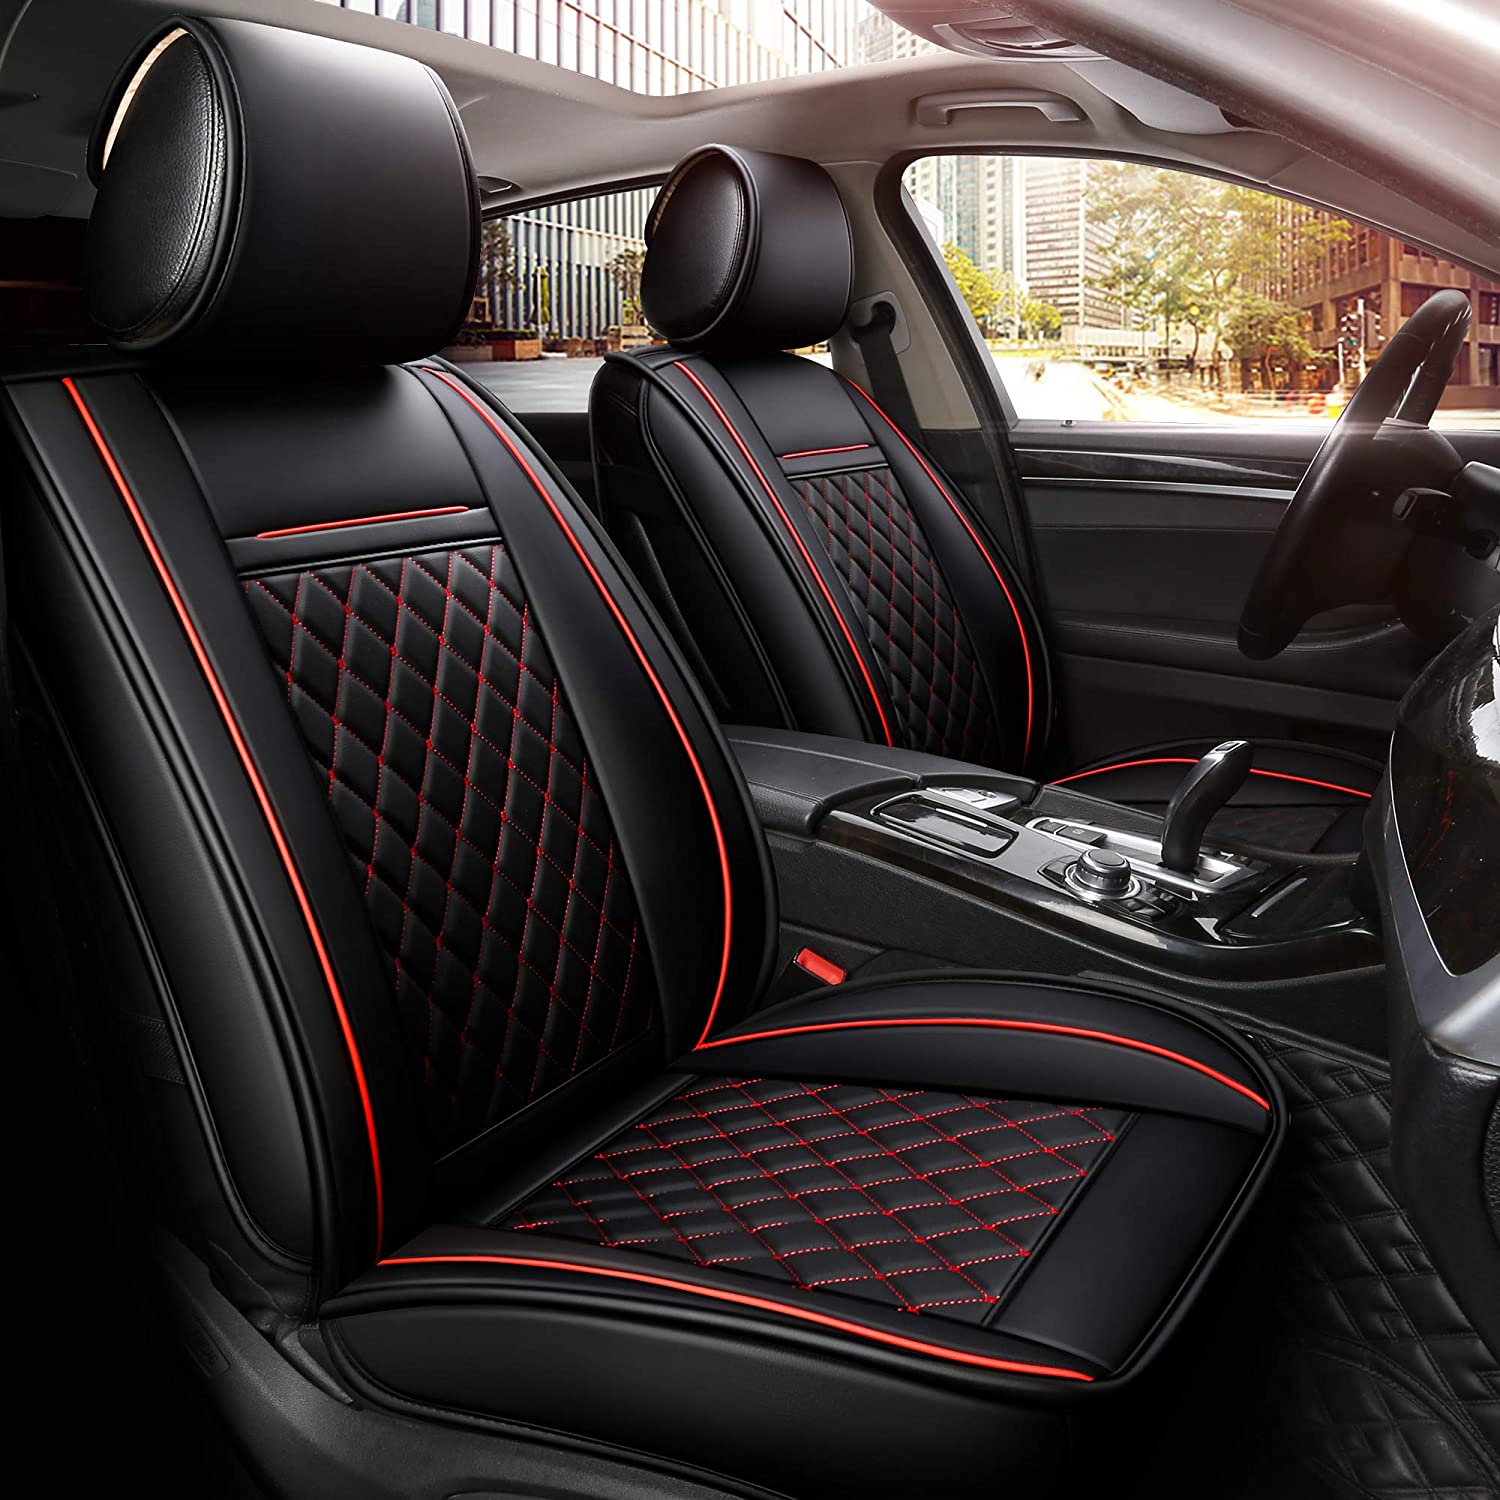  LUX Seat covers for Cars Universal Black Red Eco Leather 